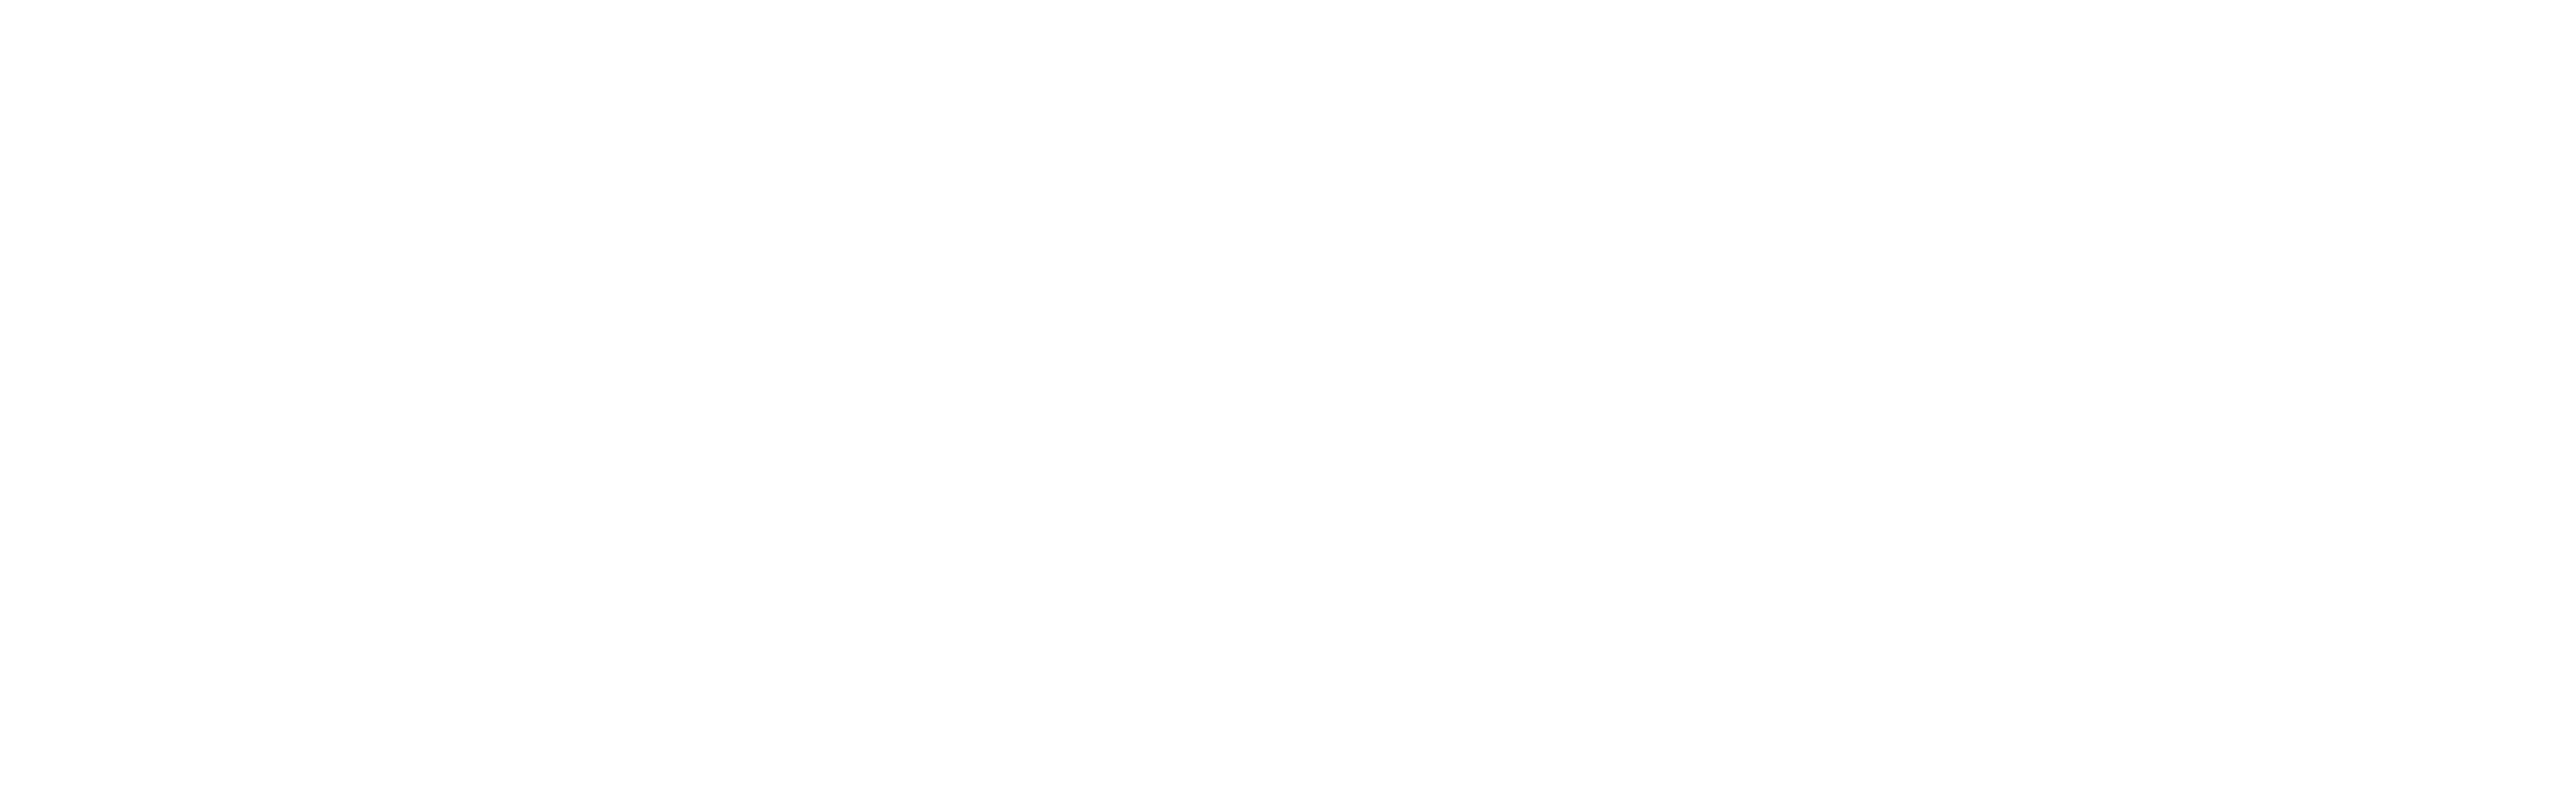 The logo of Heneways in white lettering against a black background, featuring the company name in a large, bold font with the tagline 'all ways Heneways' in a smaller script beneath it.